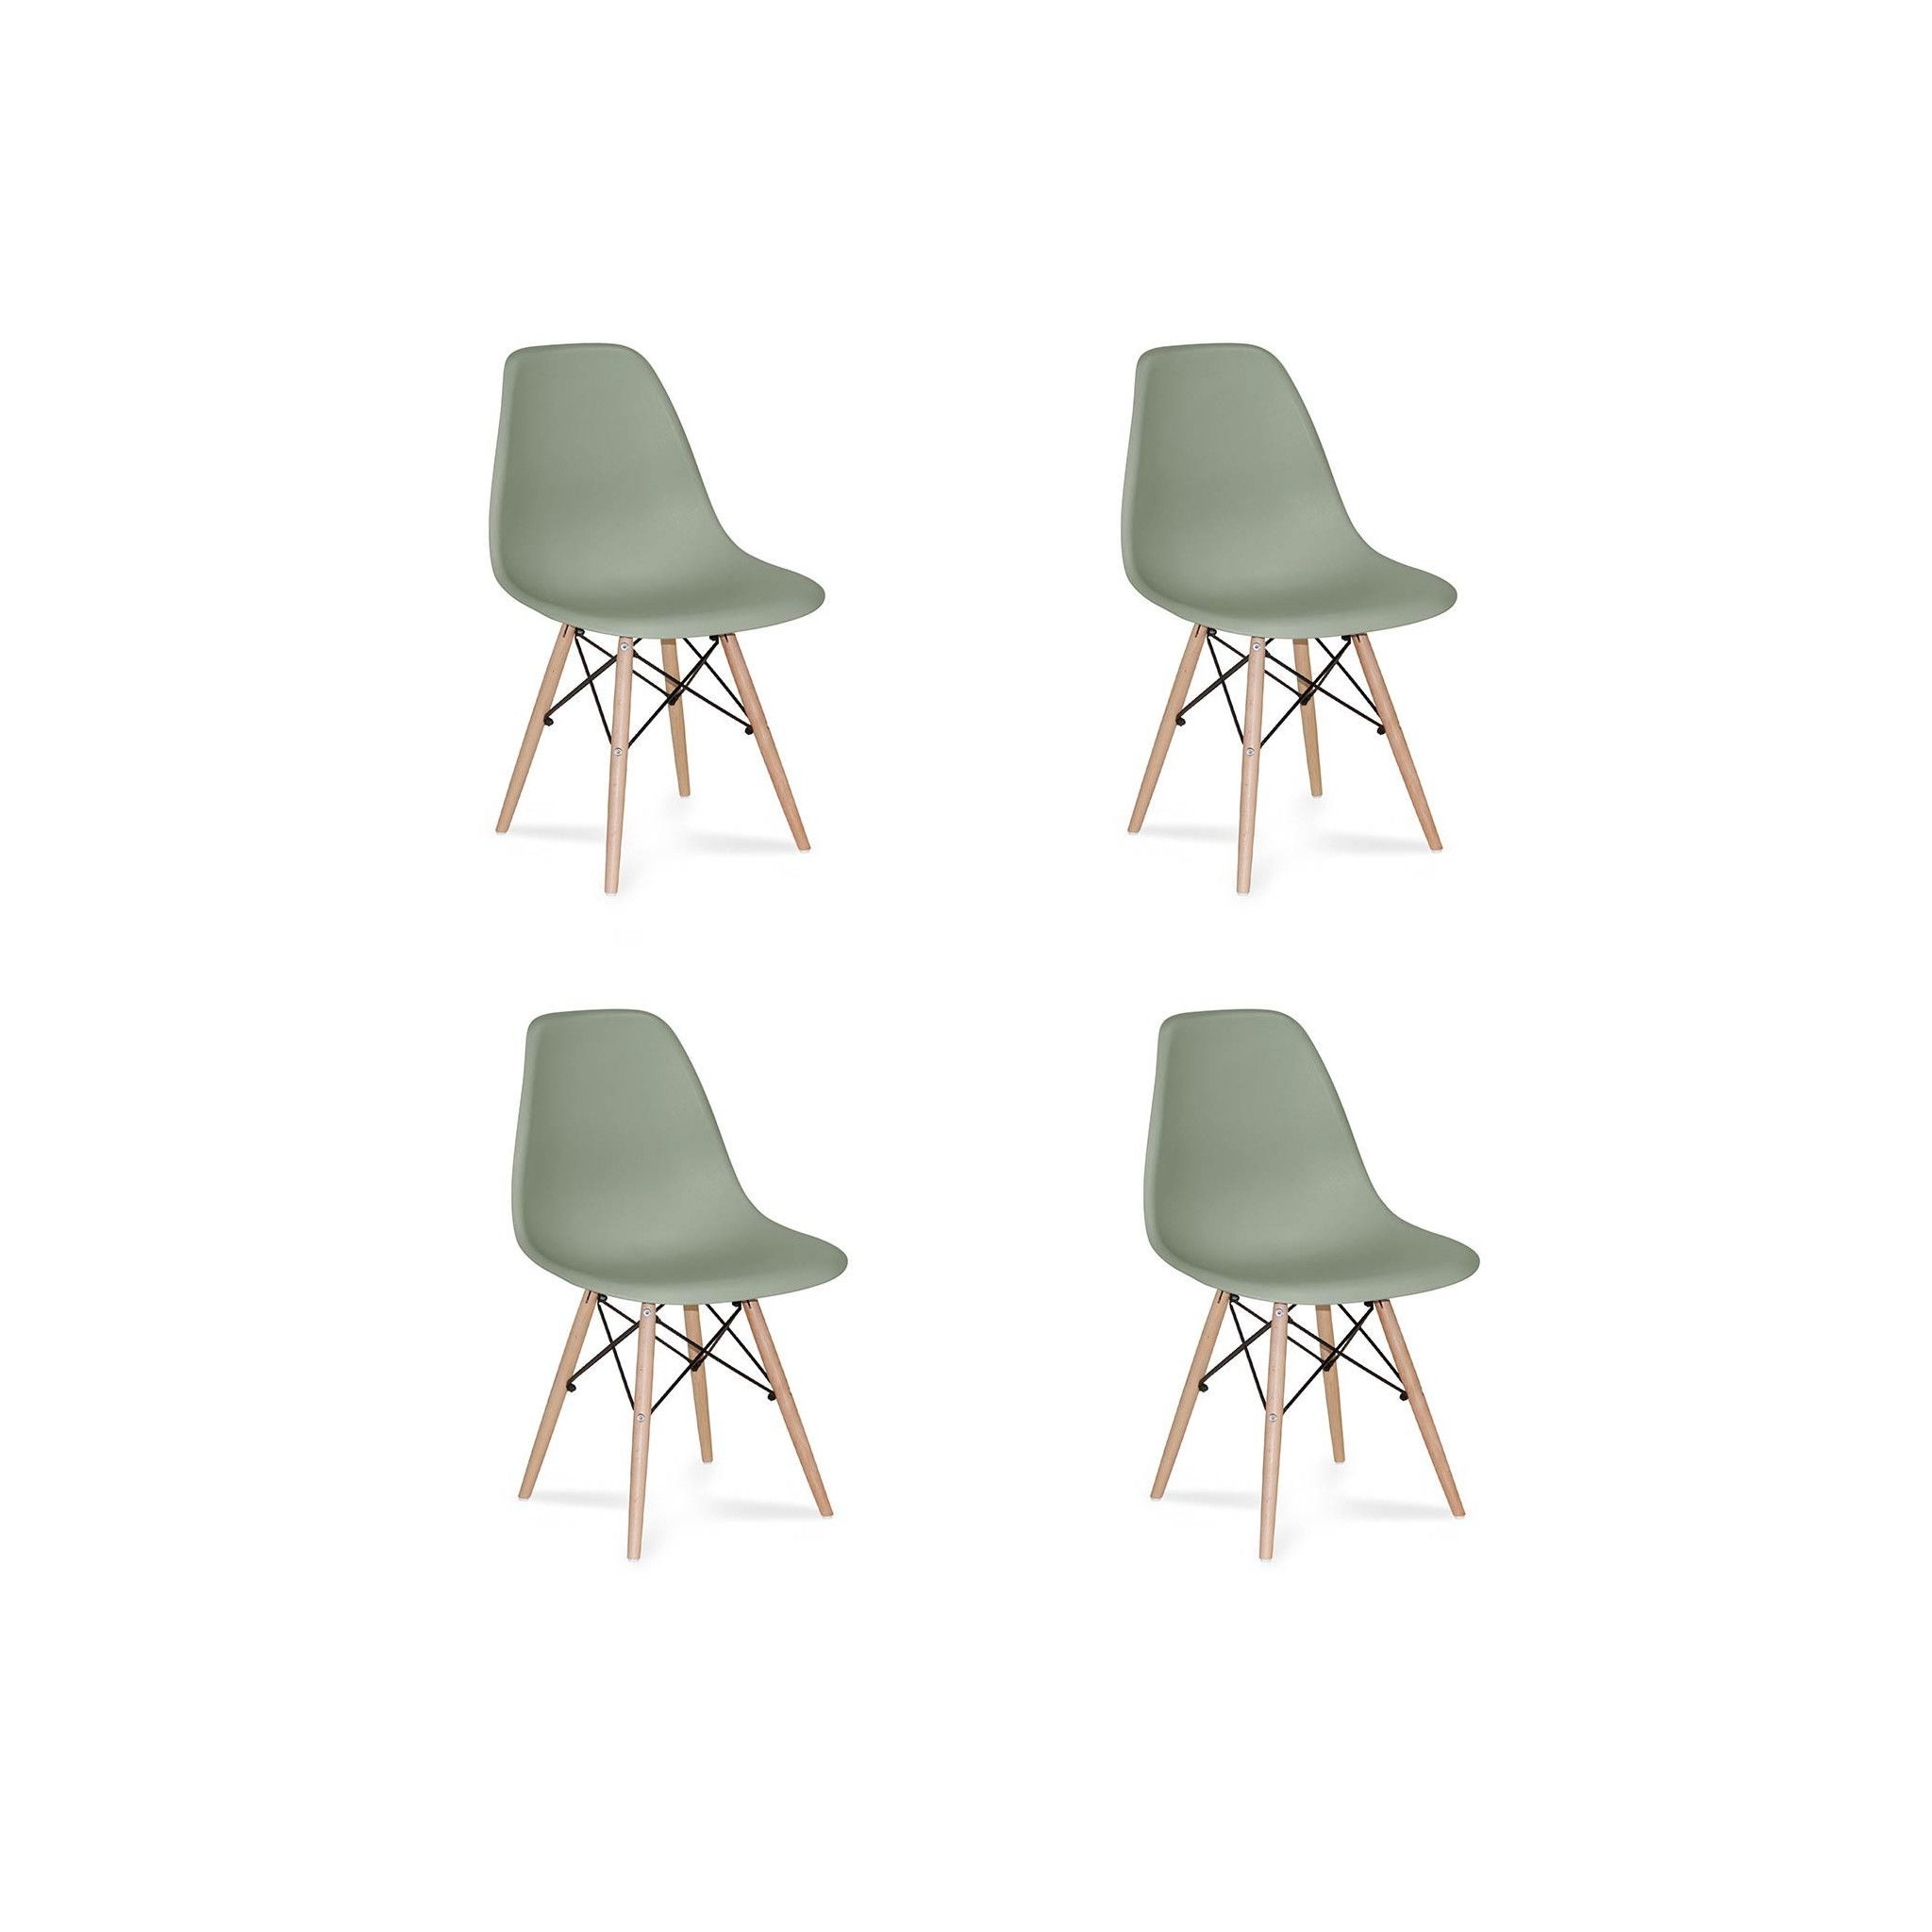 PACK 4 CHAISES TOWER WOOD VERT KALE EXTRA QUALITY